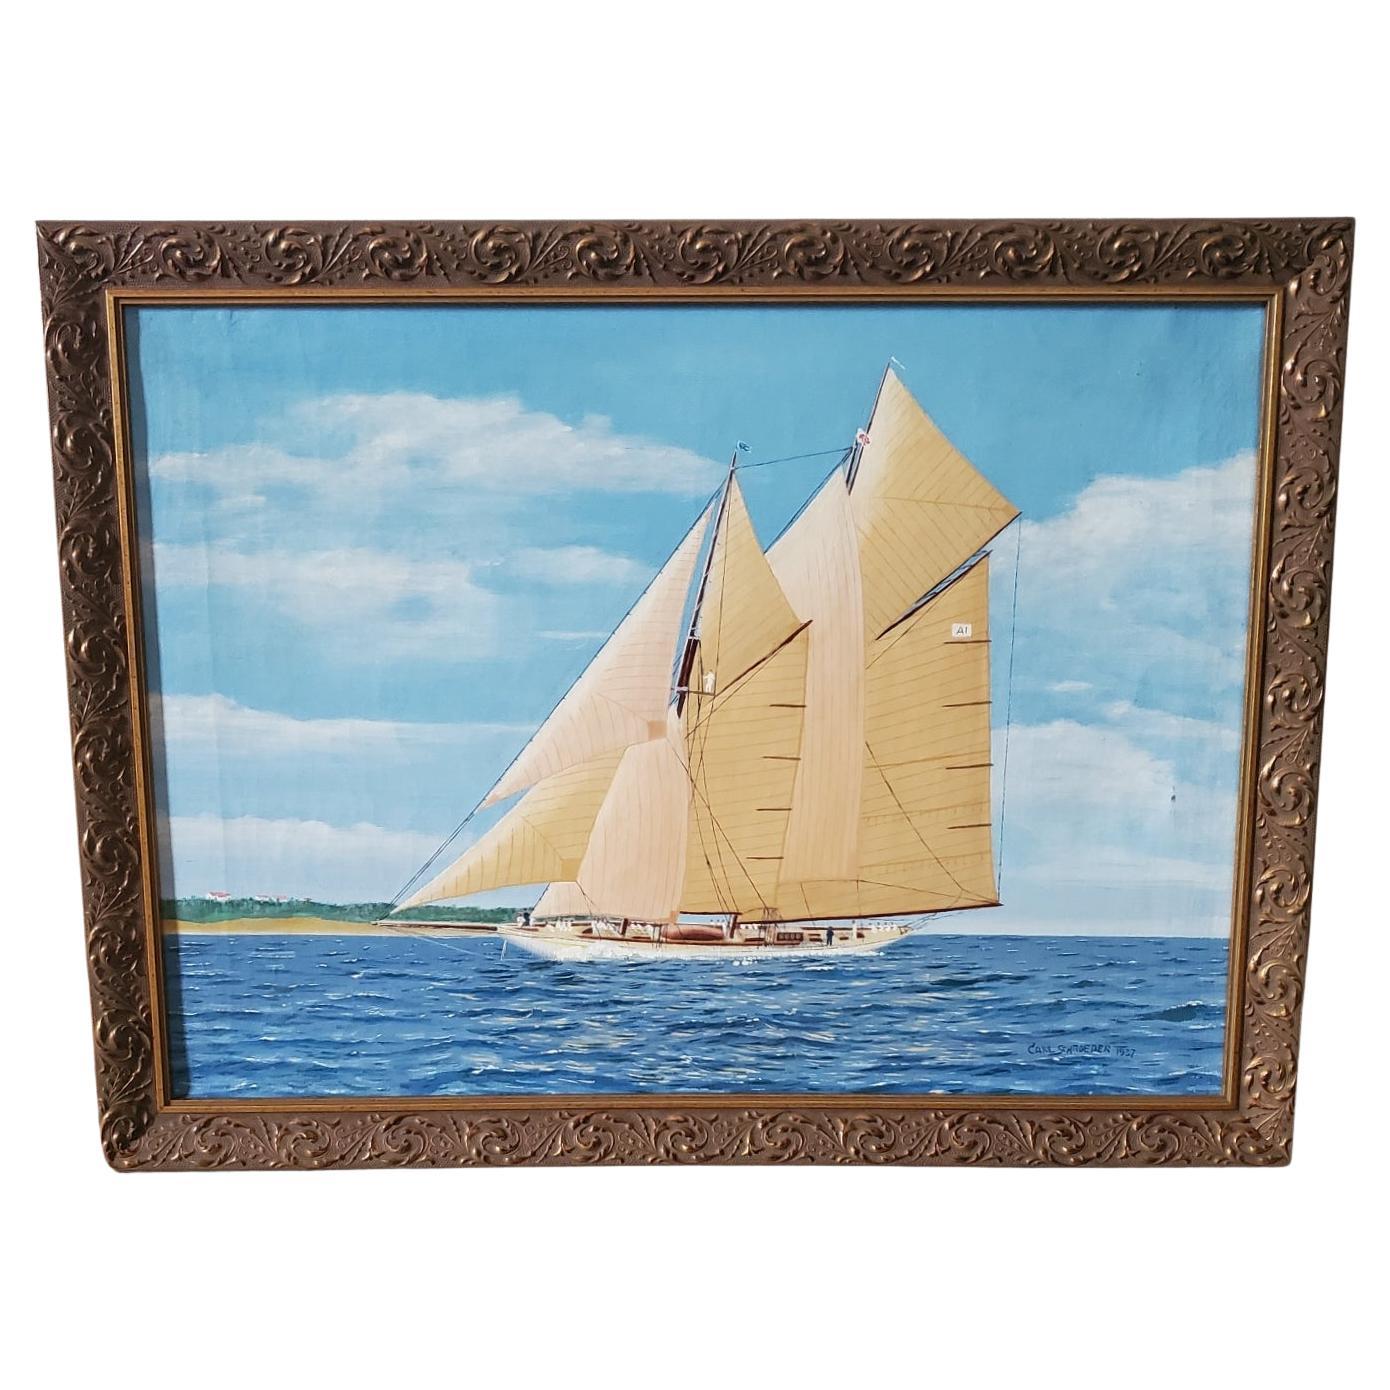 Seascape with Portrait of a Schooner-Rigged Yacht, Signed and Dated 1937